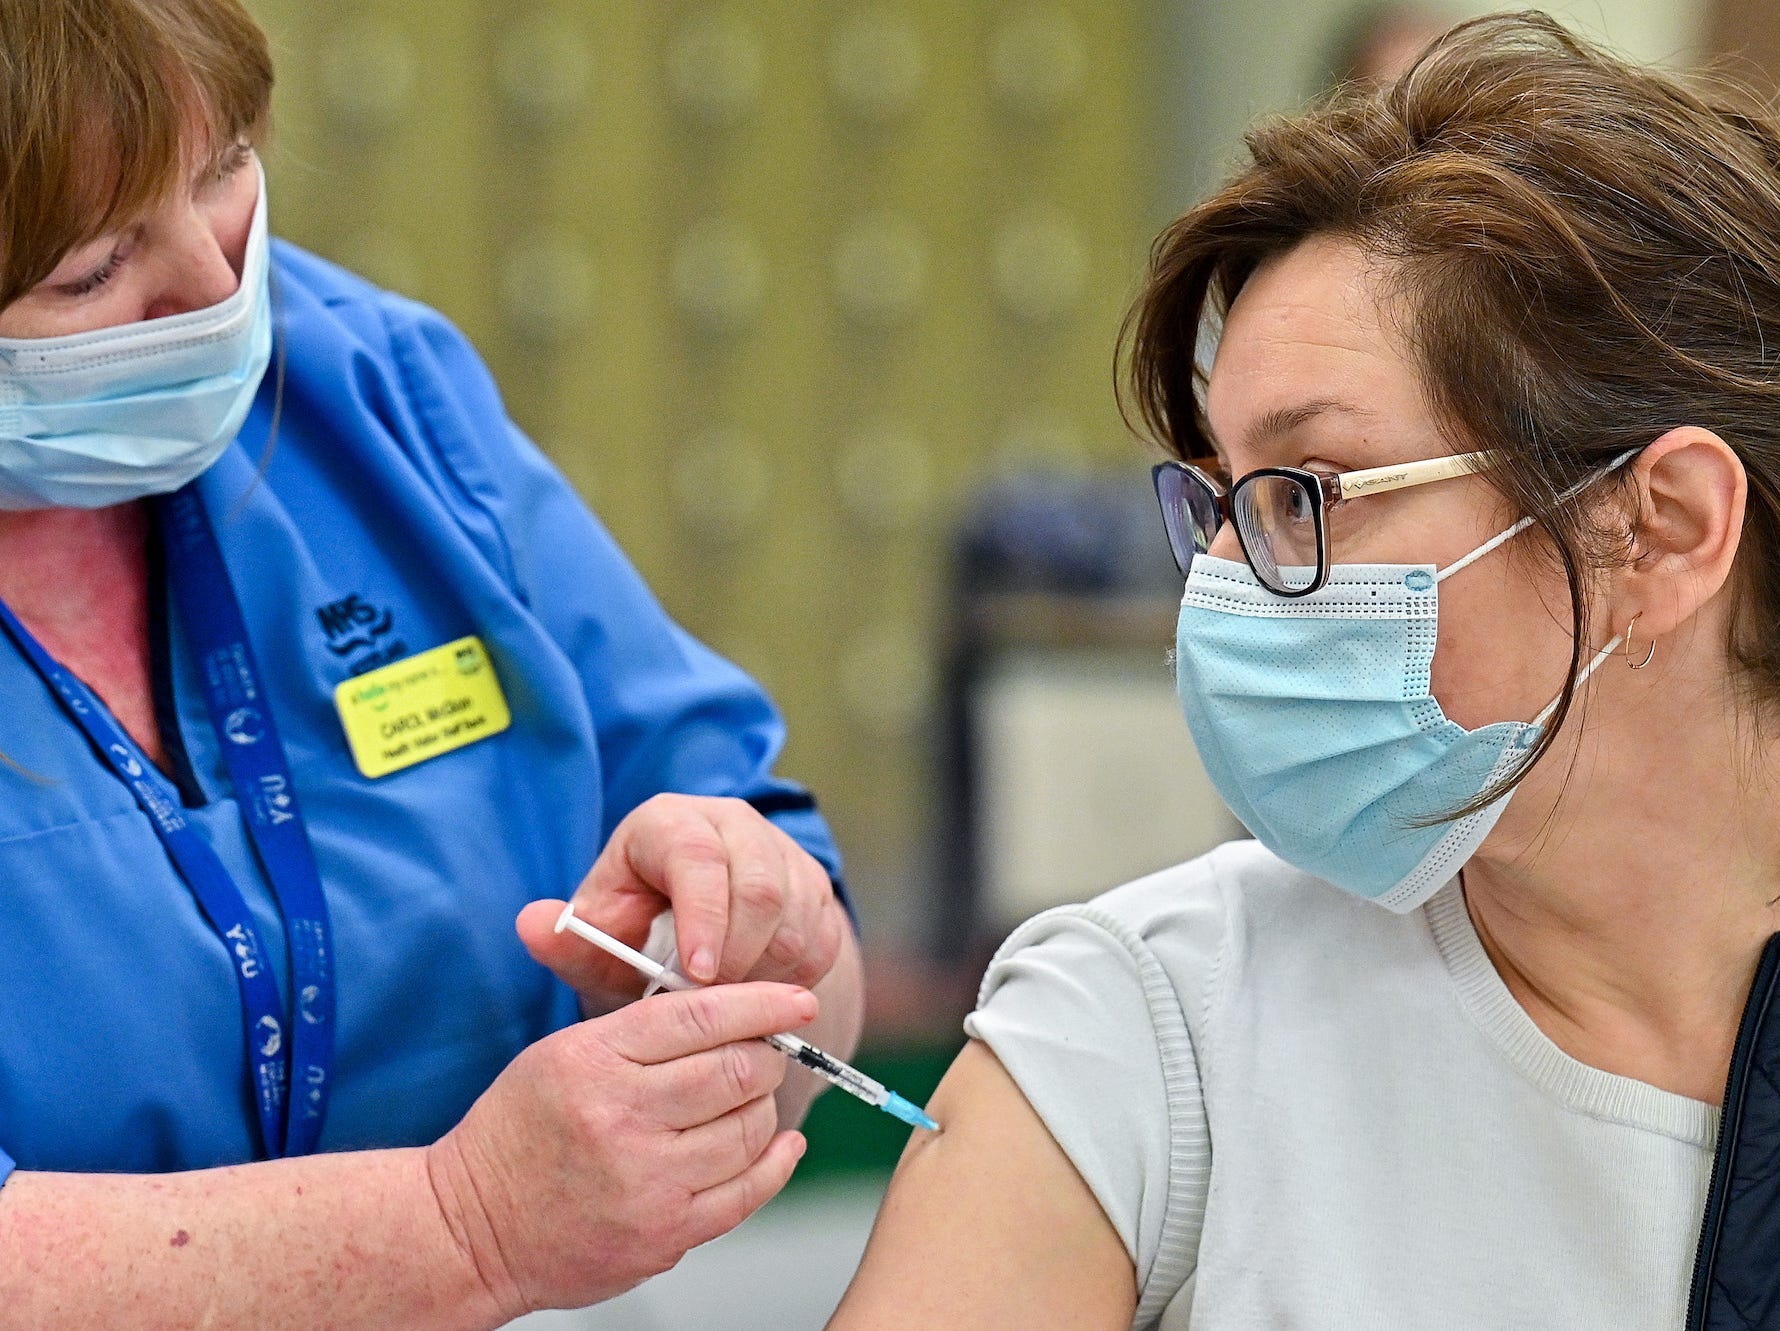 A health professionals gives a woman wearing a mask a COVID-19 vaccine in the arm in Scotland.